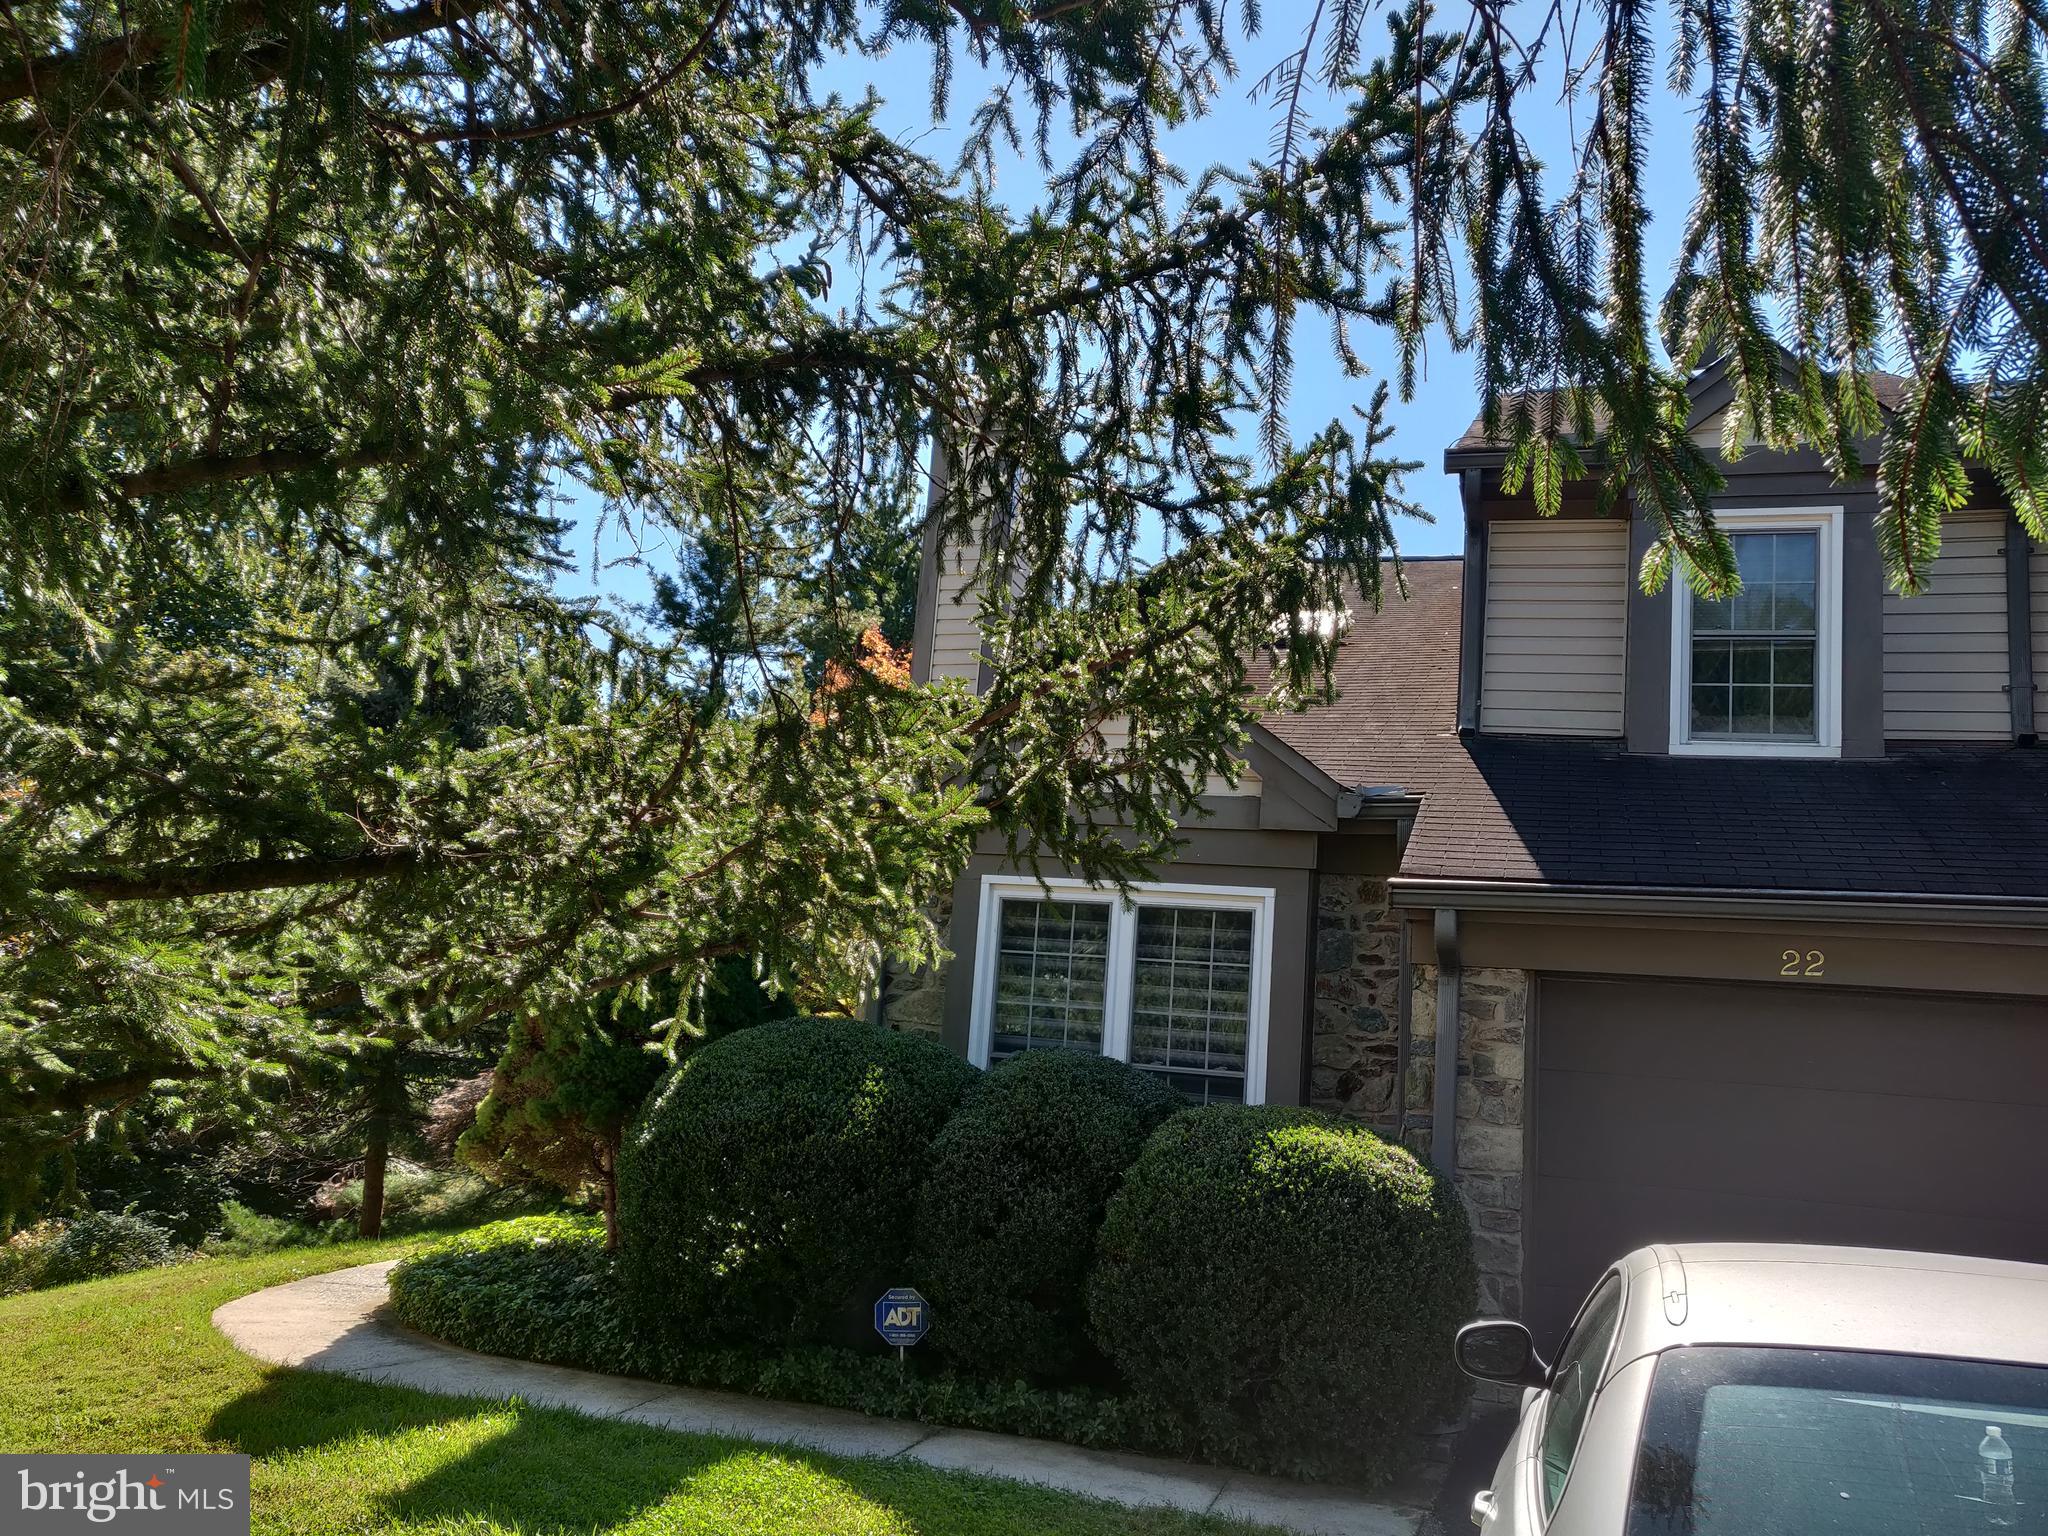 a view of a house with a large tree and a yard